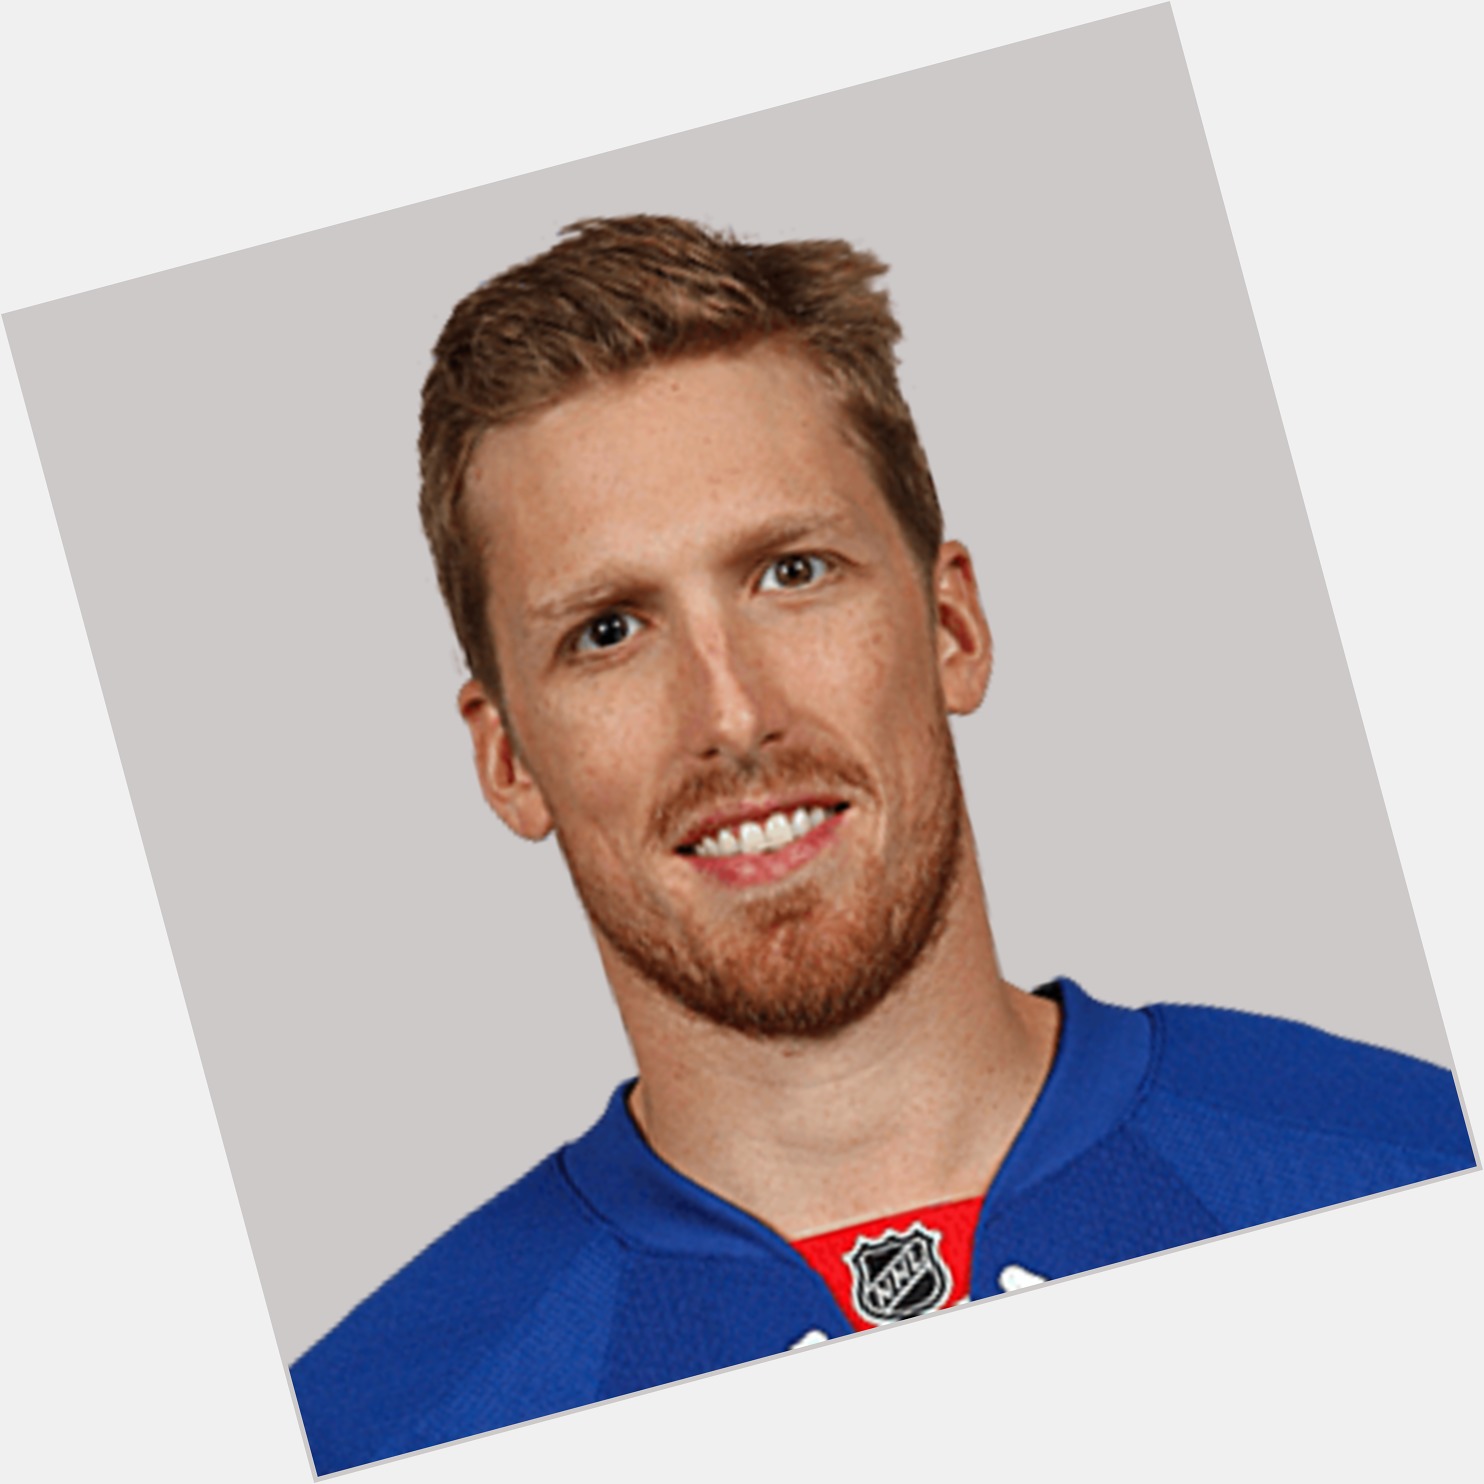 <a href="/hot-men/marc-staal/where-dating-news-photos">Marc Staal</a> Athletic body,  blonde hair & hairstyles